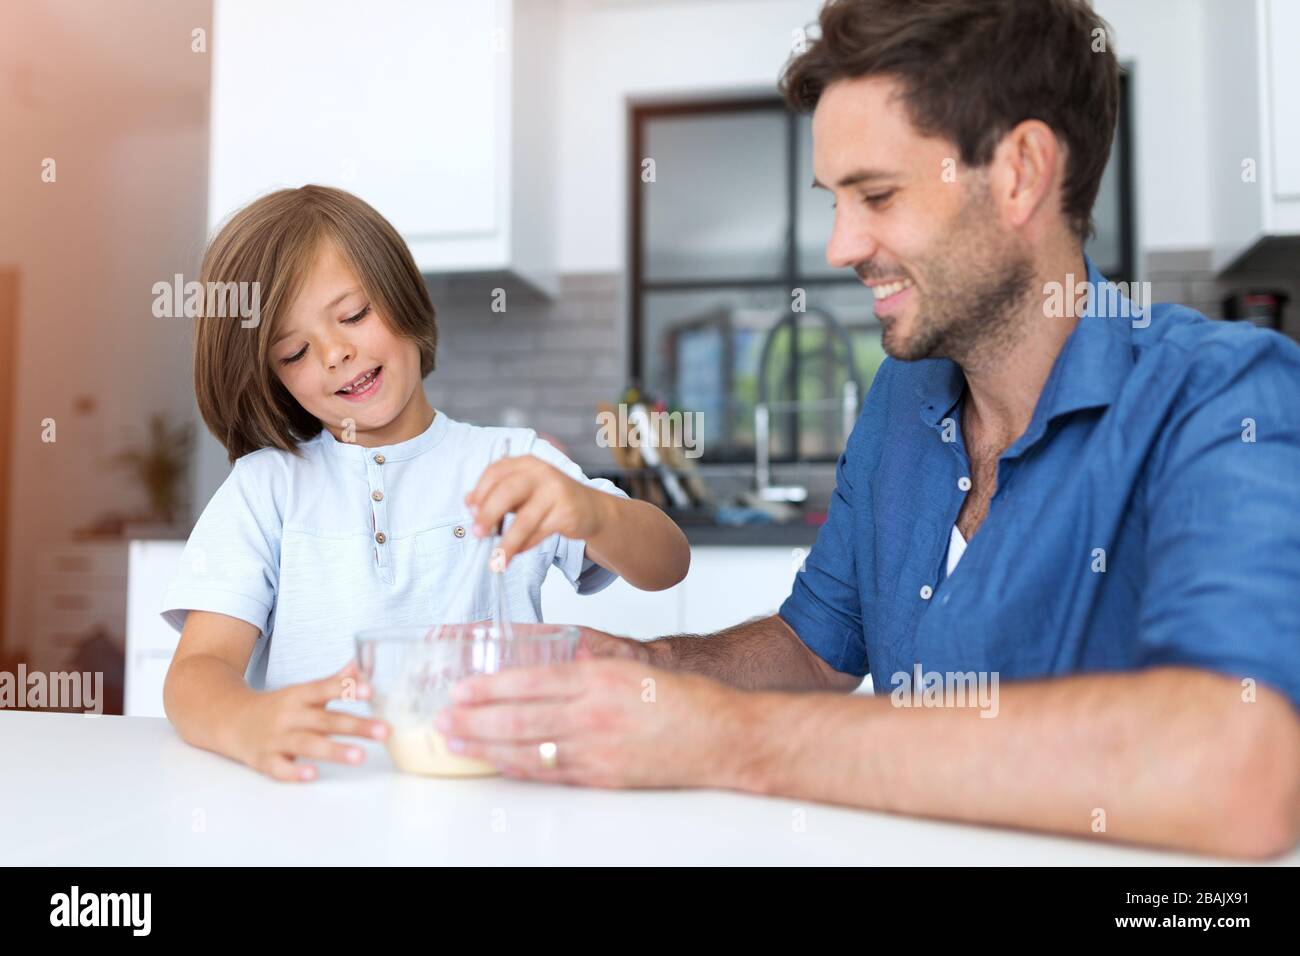 Father and son in the kitchen Stock Photo